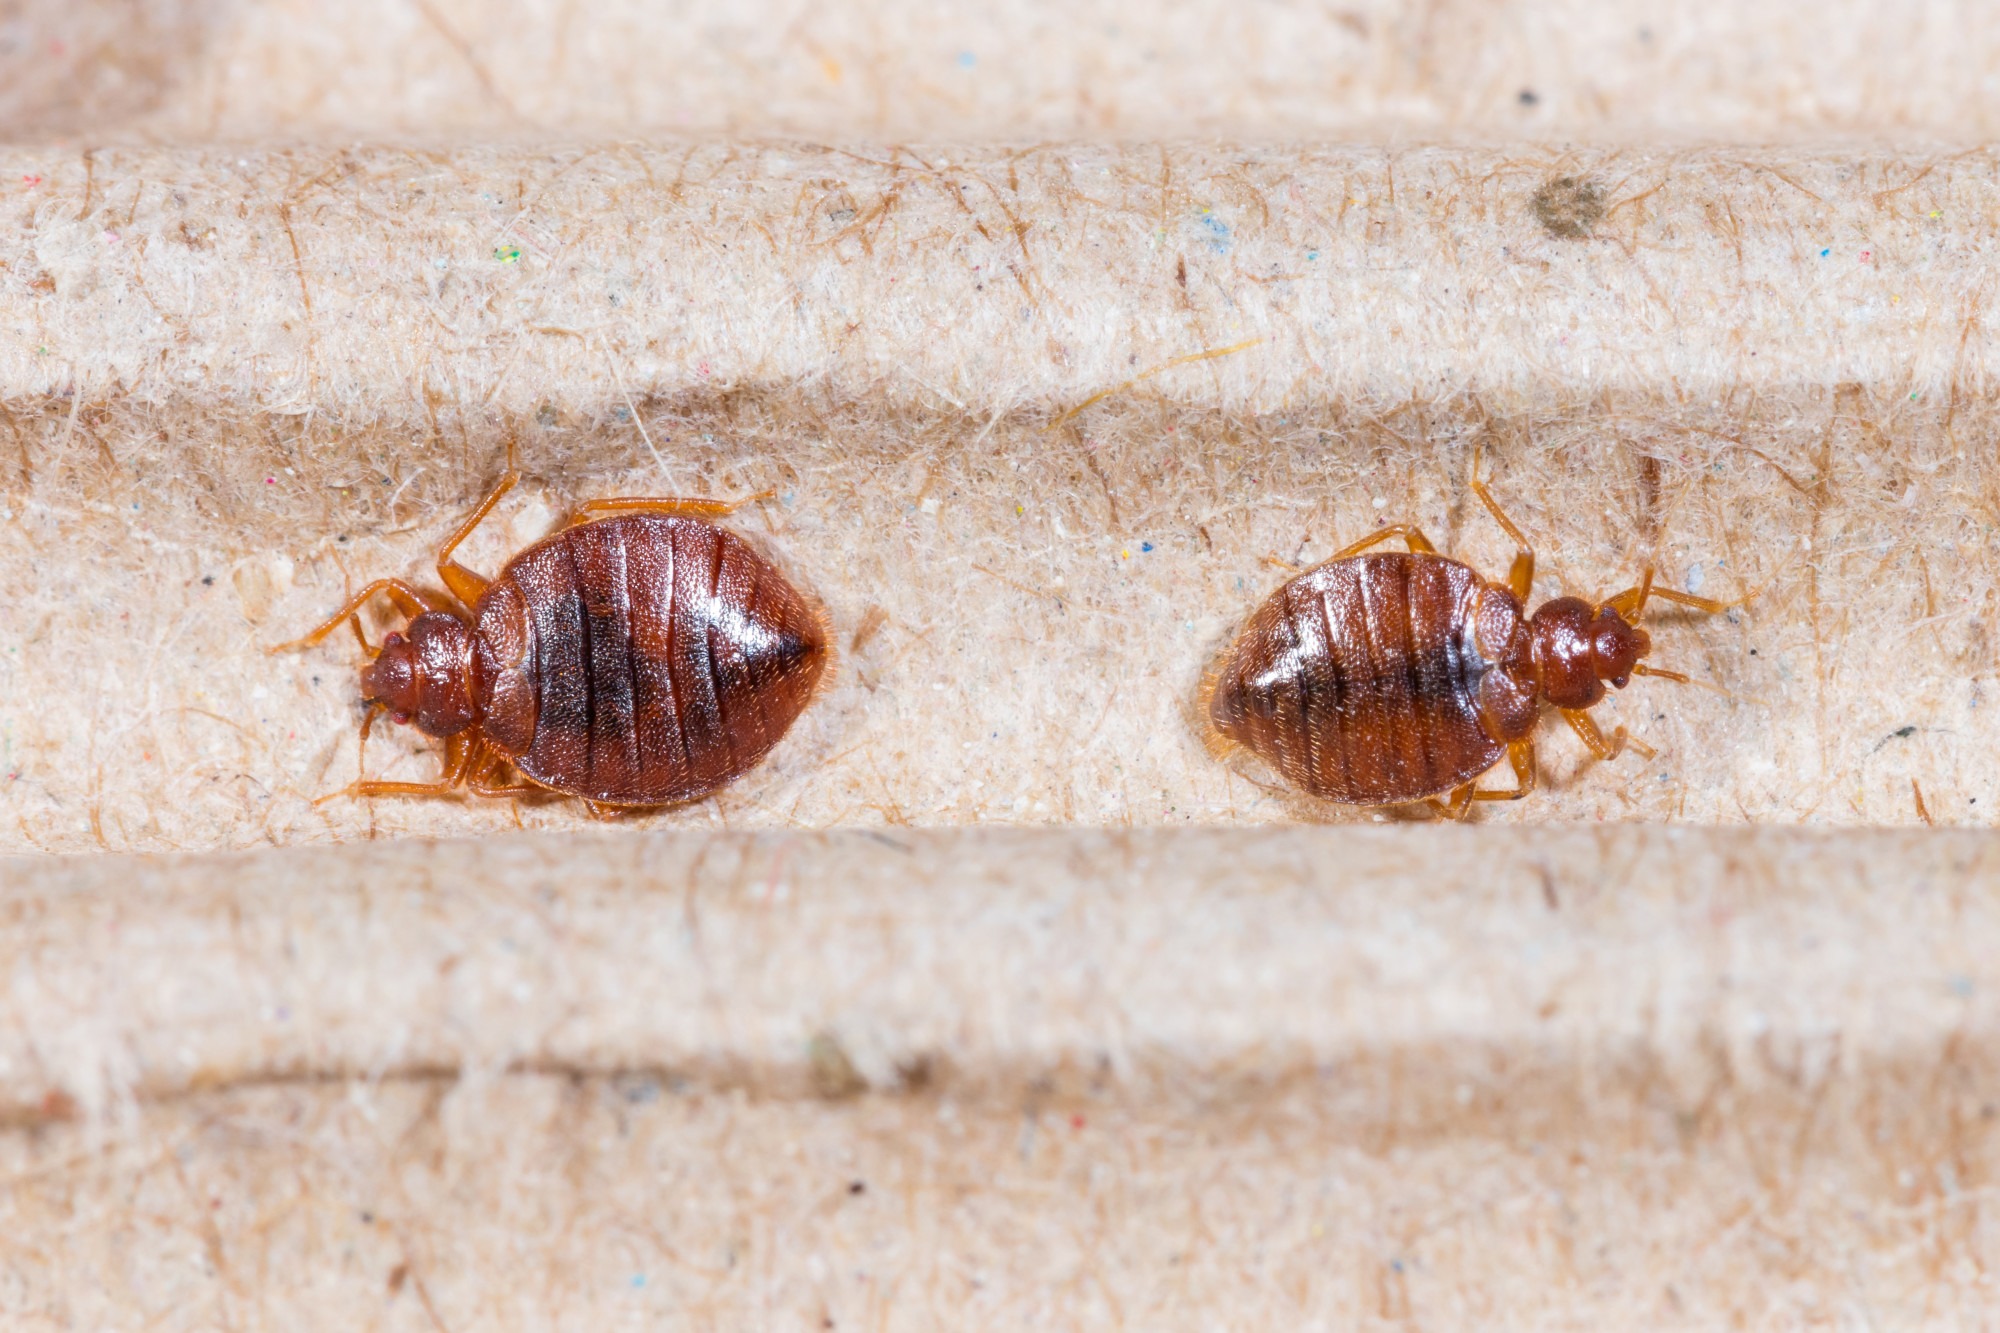 Bed Bug Control: The Warning Signs of Bed Bugs